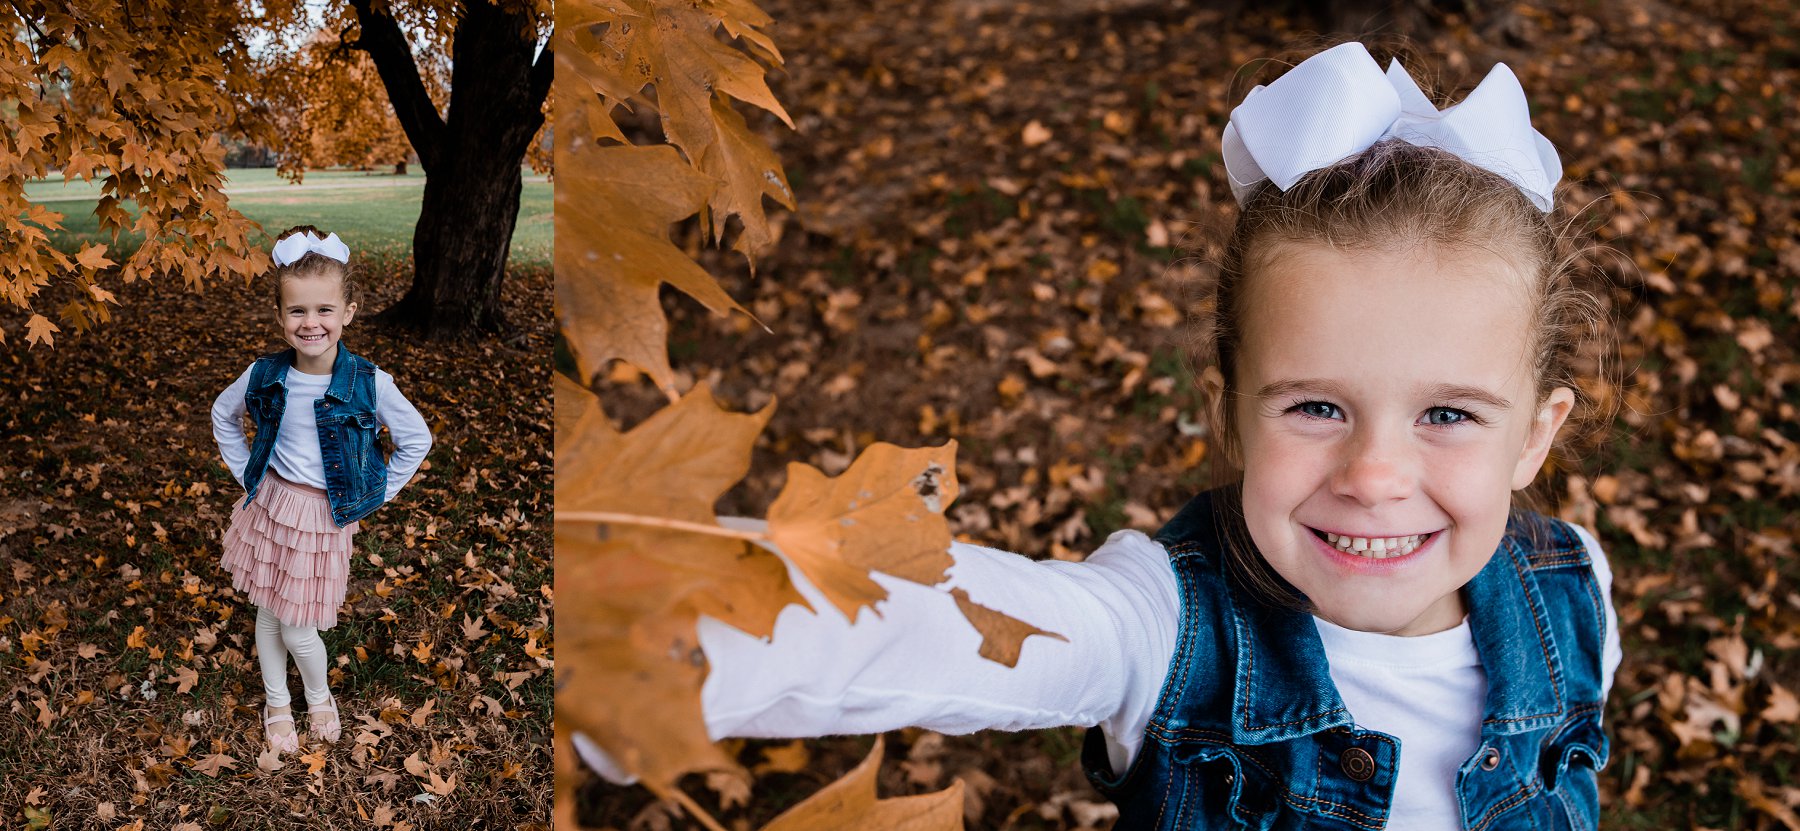 Fall Family Photography at Belvoir WInery by Family Photographer in Kansas City, Merry Ohler (11)